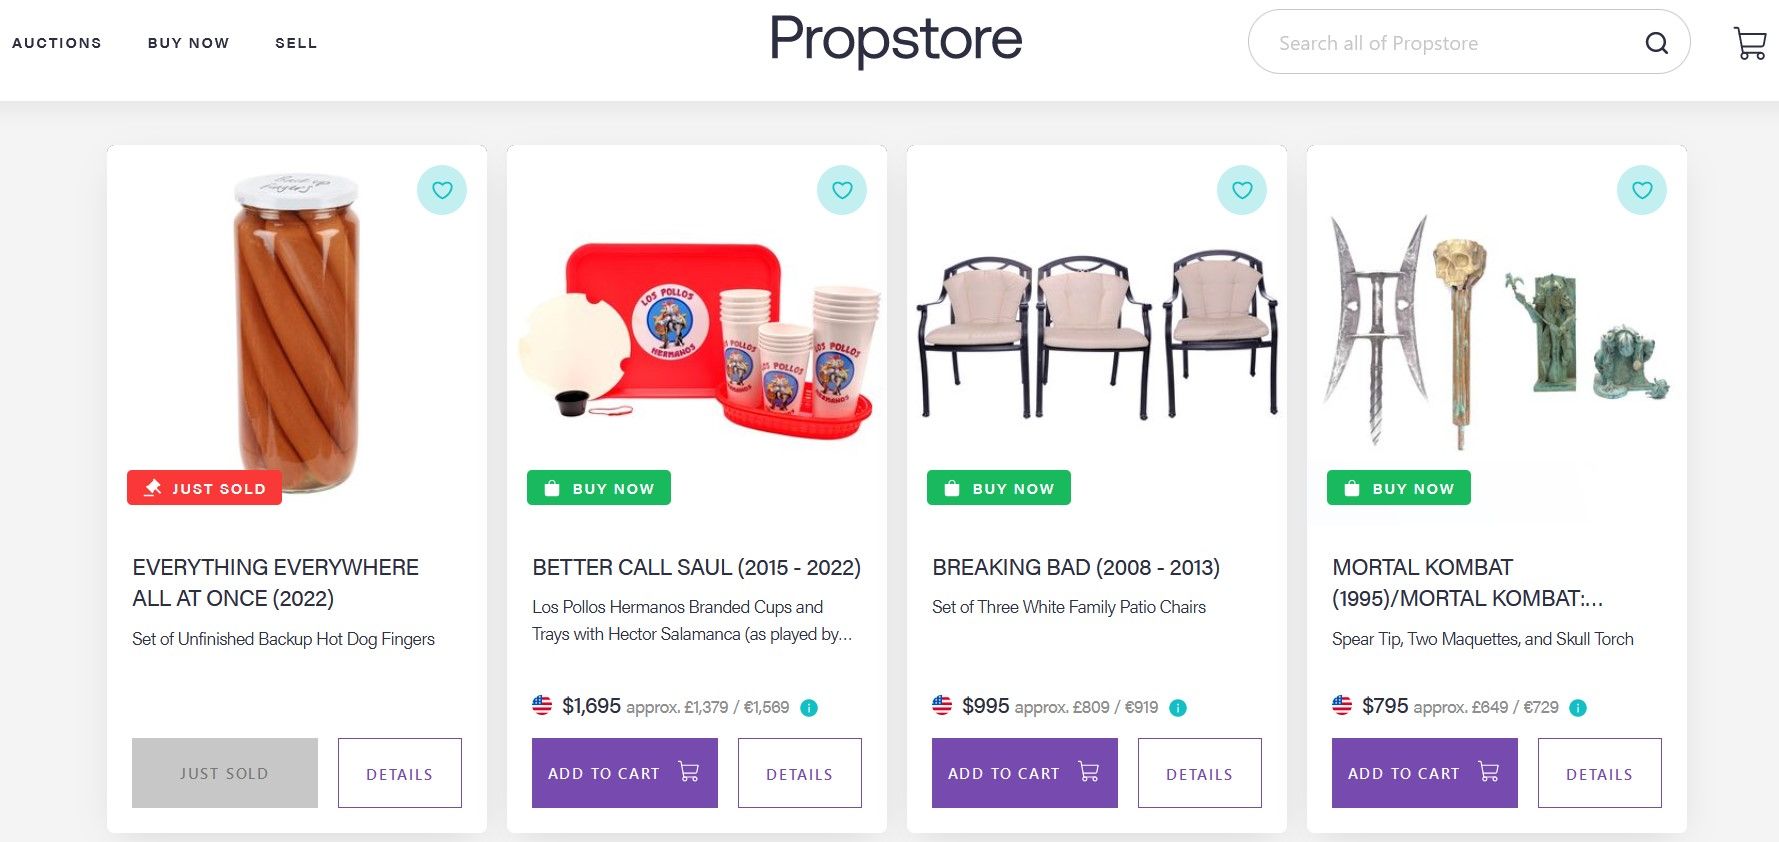 Buying Movie Props on Propstore